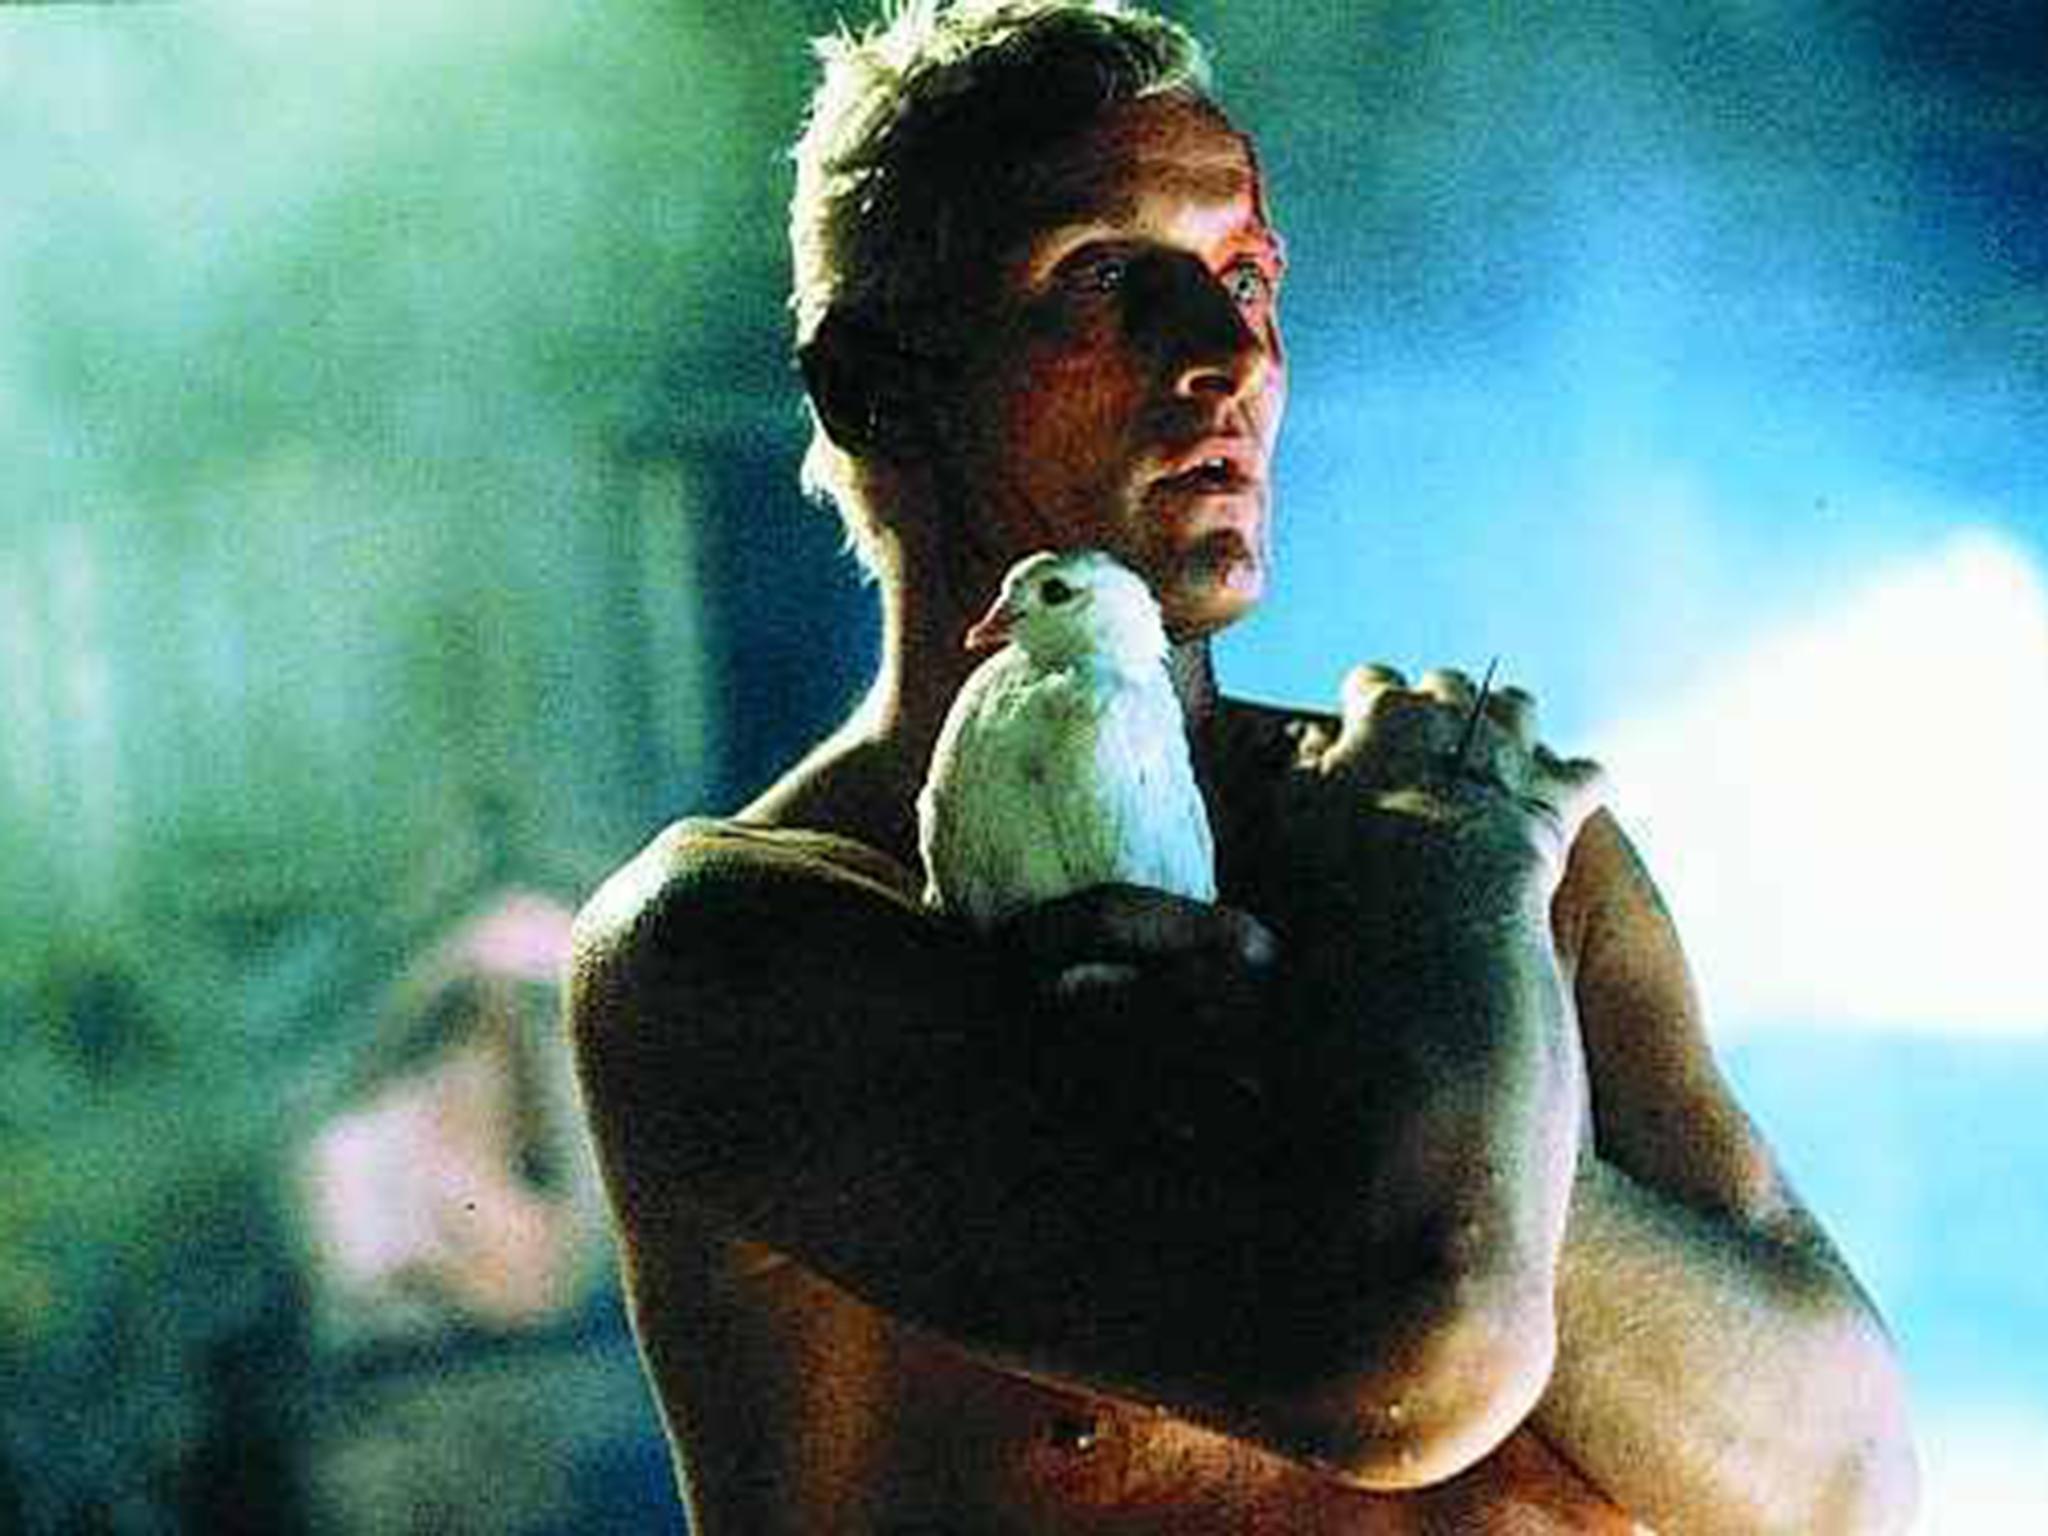 'All these moments will be lost in time...like tears in rain' - Roy Batty as Rutger Hauer in 1982's Blade Runner